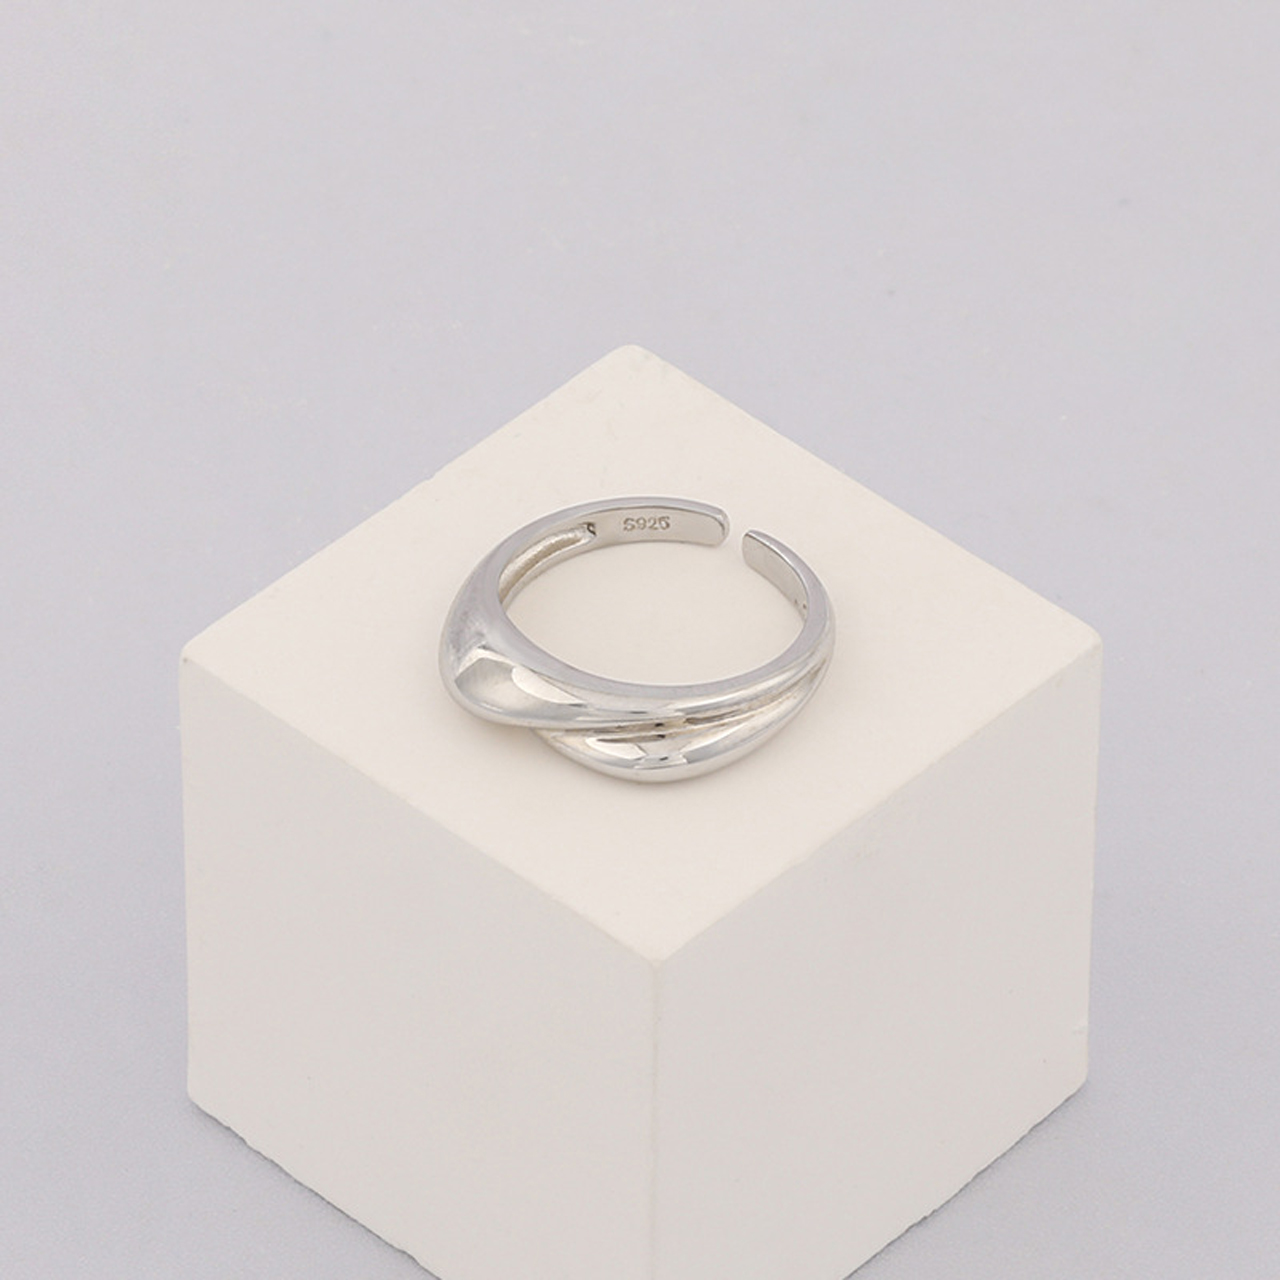 Simple Adjustable Silver Ring